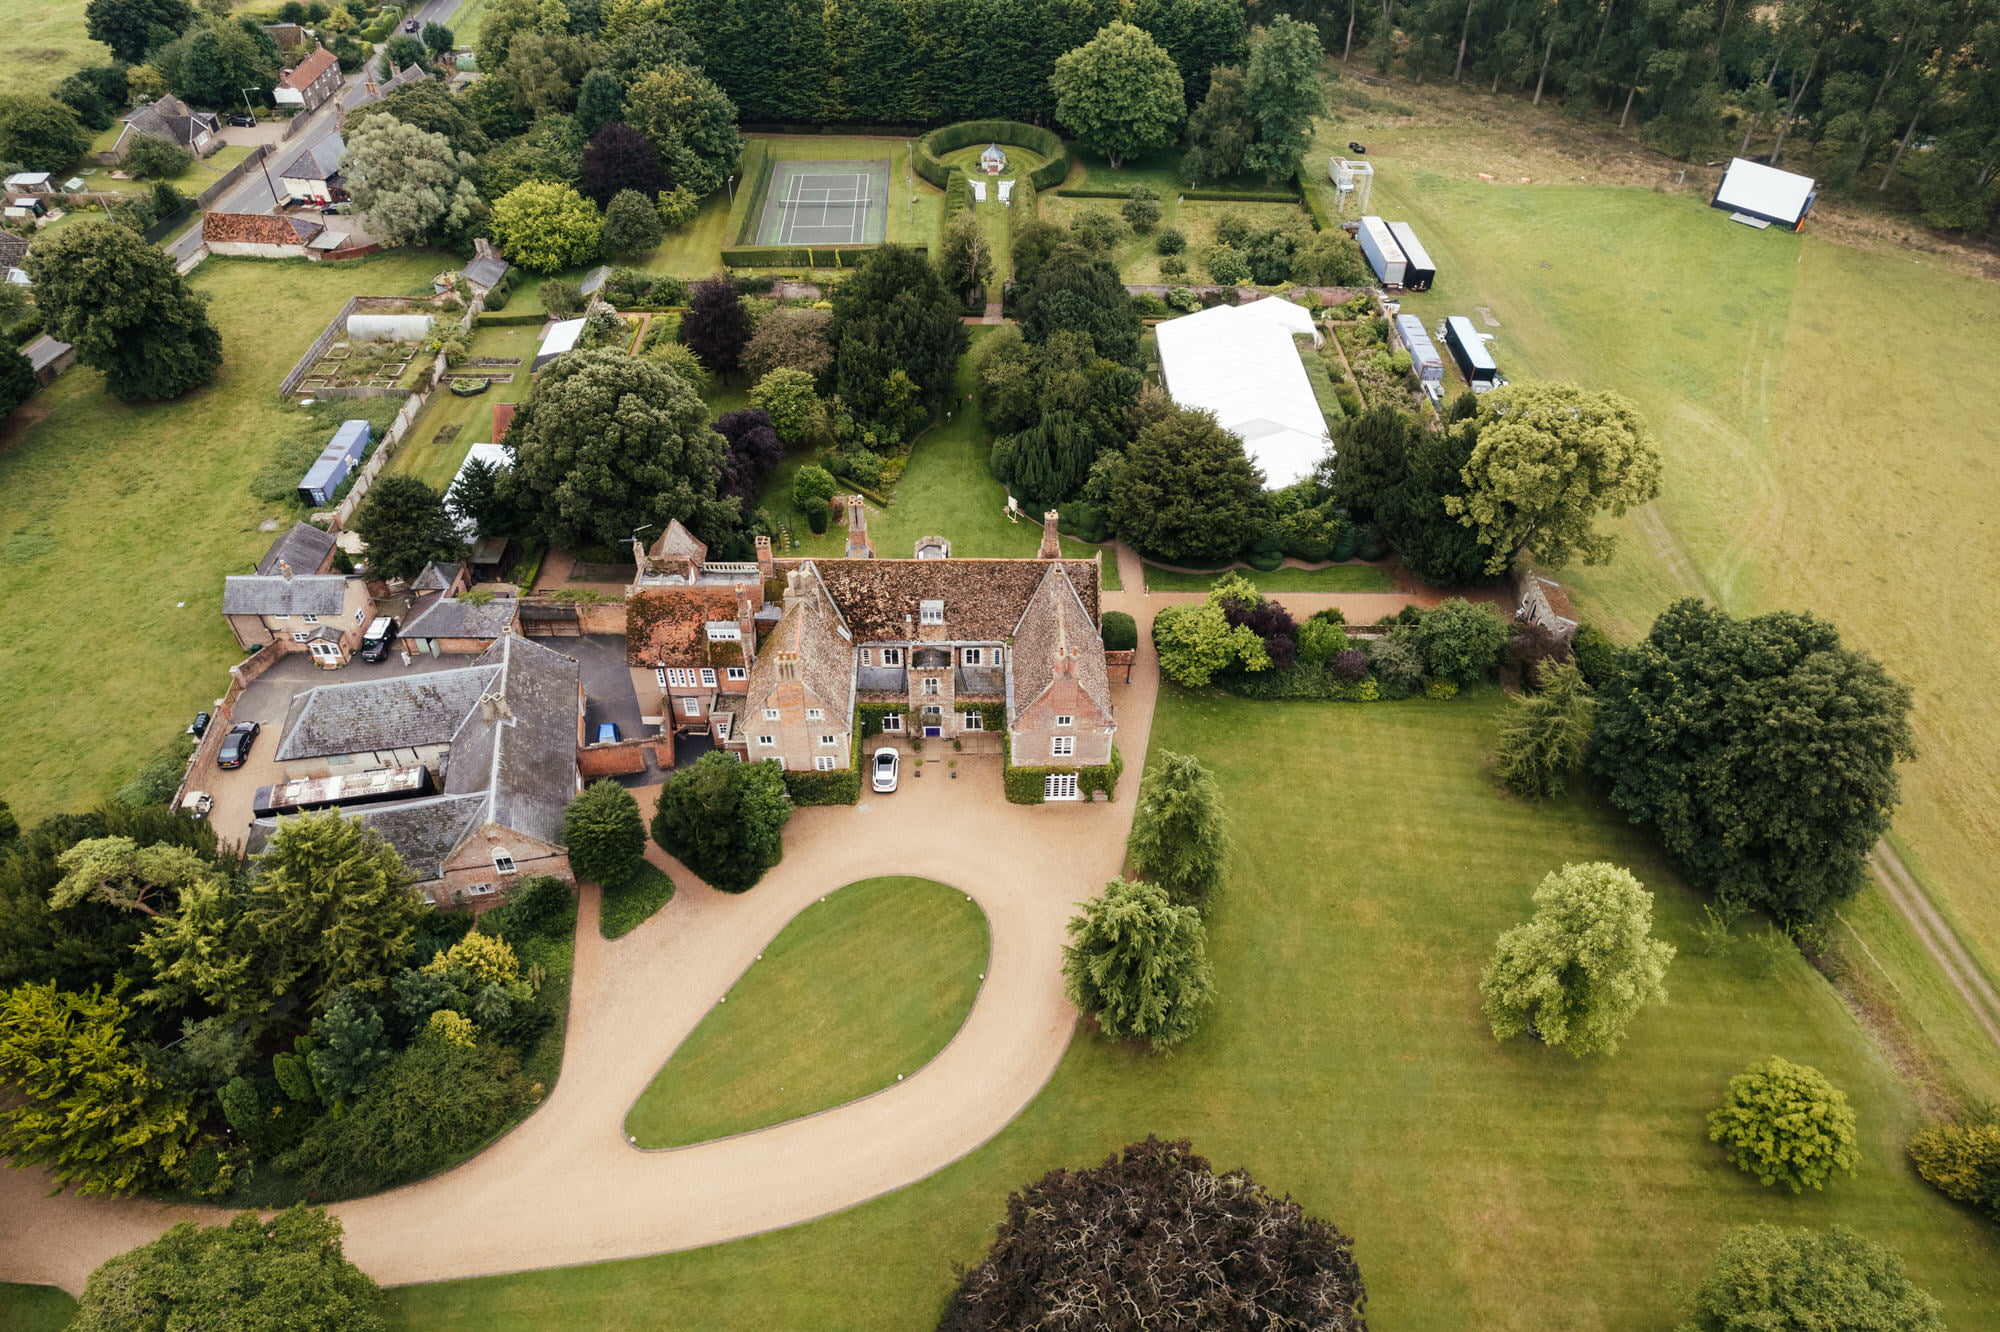 Aerial view of English countryside estate and gardens